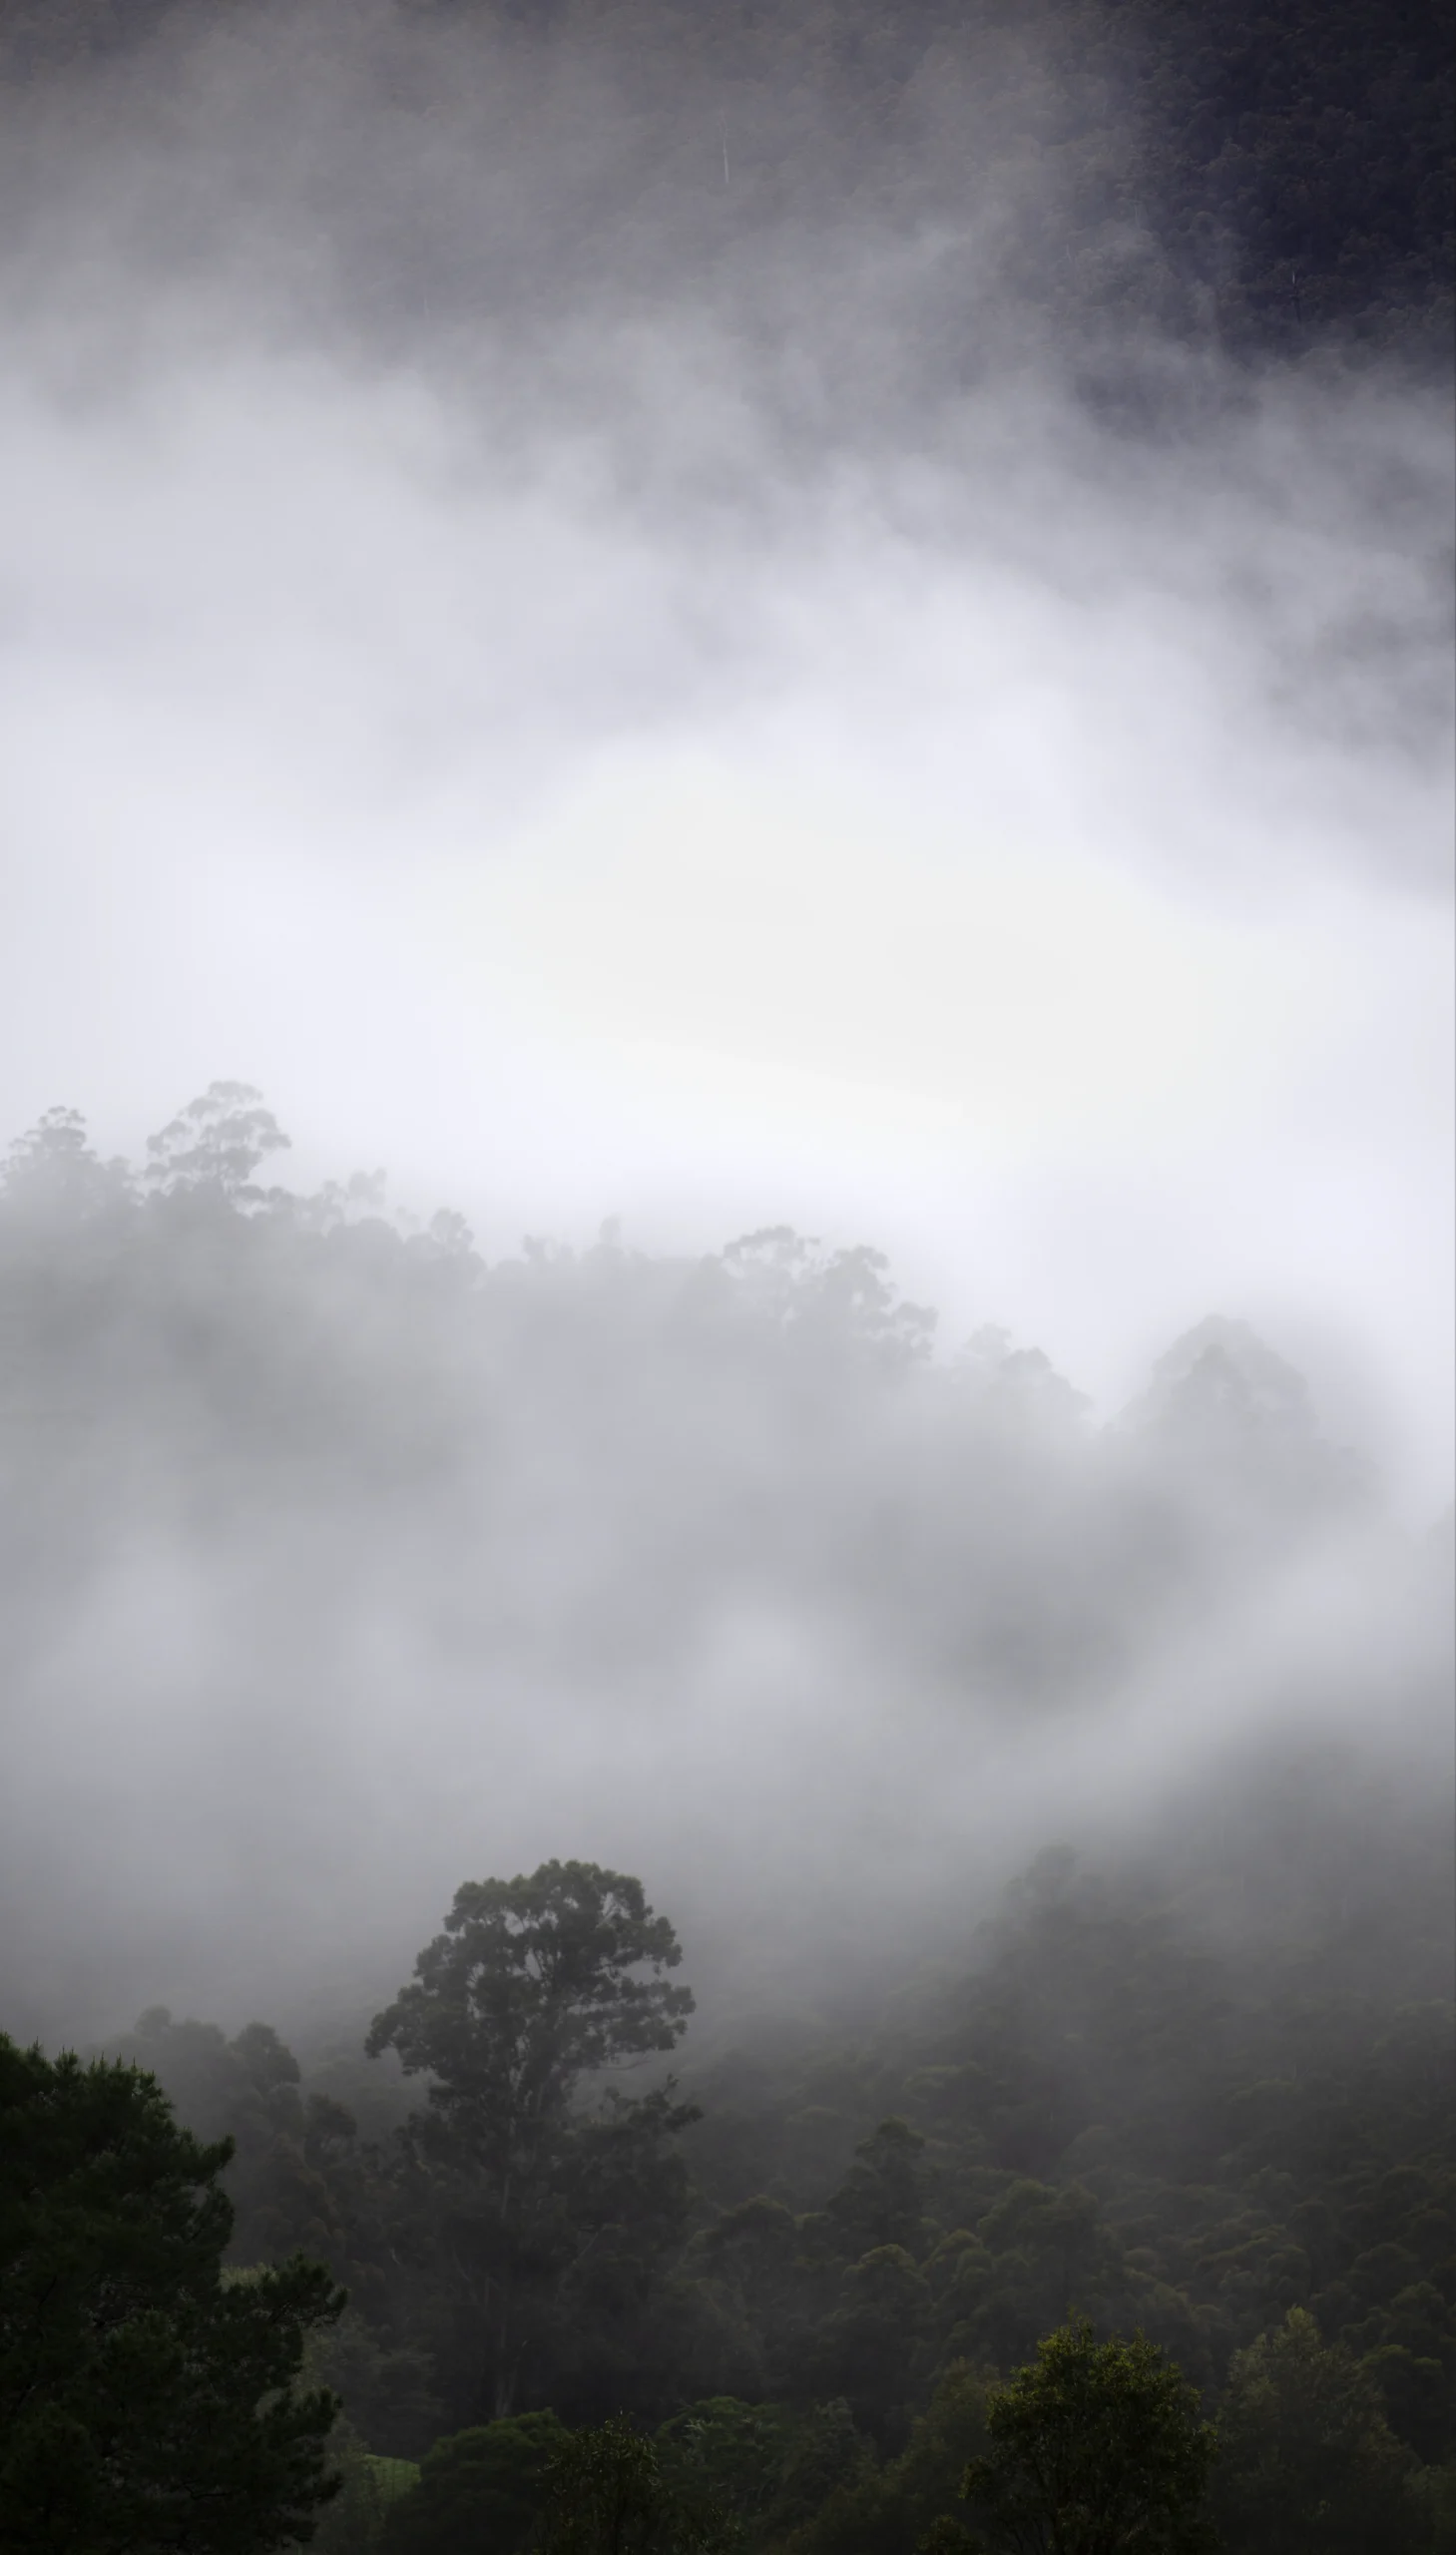 The Stand_Trees stand covered by Fog in Tasmania's Huon Valley. Photography by Emma Coombes at the Elm and the Raven